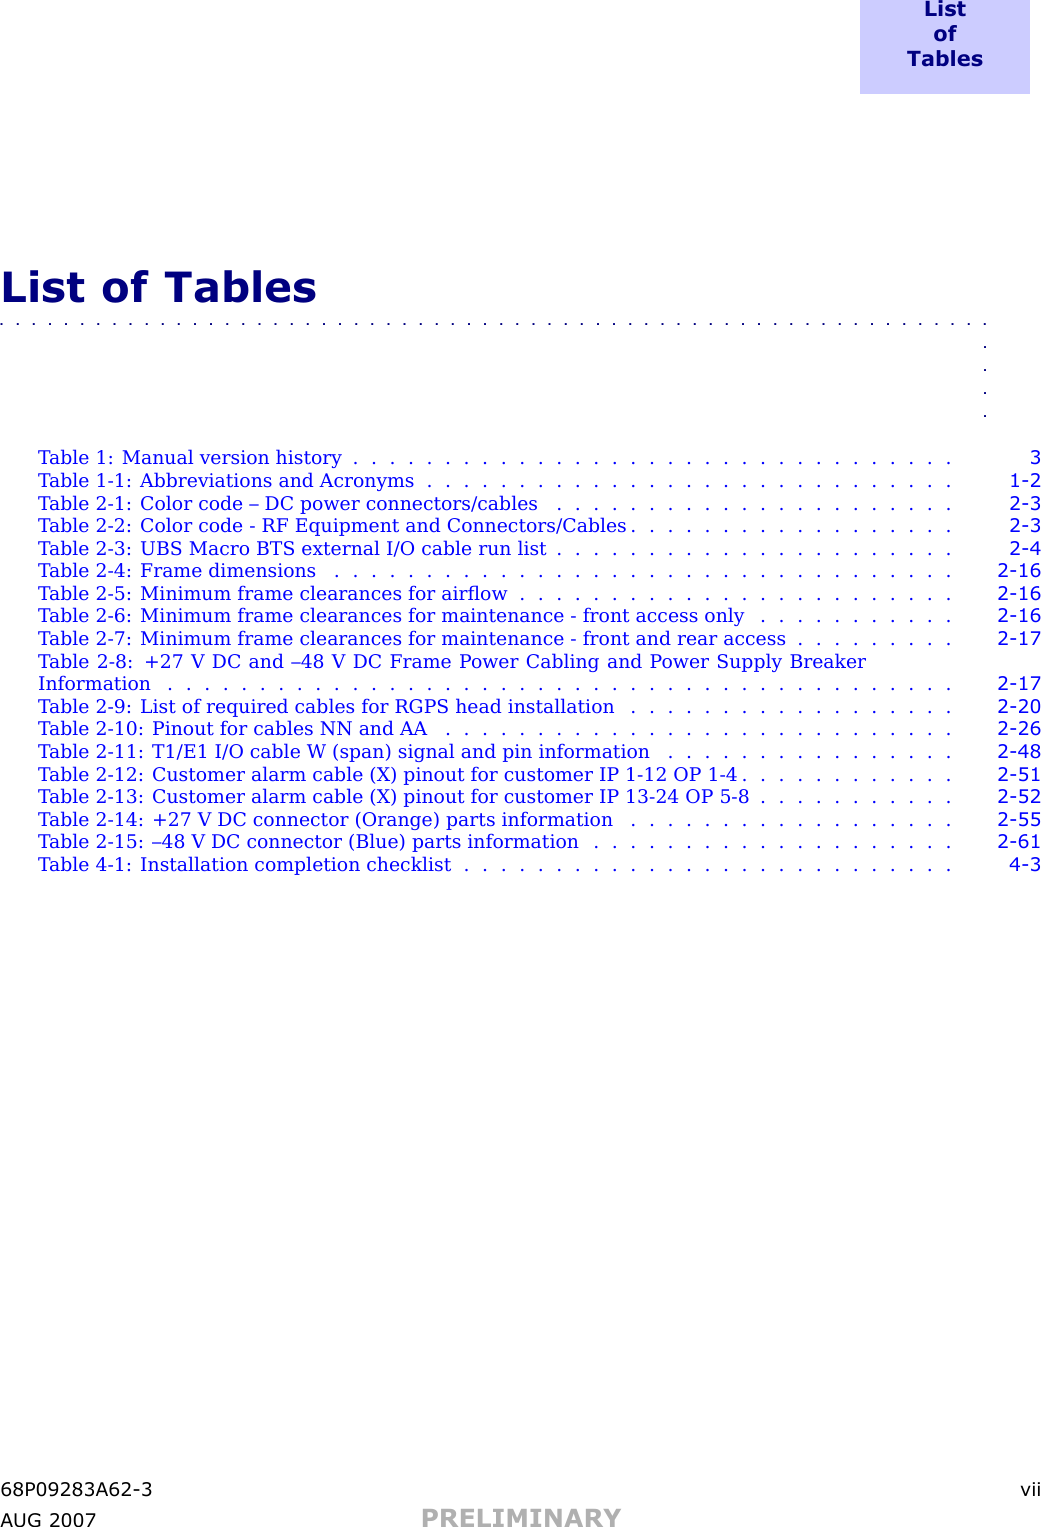 L i s to fT a b l e sList of Tables■■■■■■■■■■■■■■■■■■■■■■■■■■■■■■■■■■■■■■■■■■■■■■■■■■■■■■■■■■■■■■■■■■T able 1: Manual version history . . . . . . . . . . . . . . . . . . . . . . . . . . . . . . . . . 3T able 1 -1: Abbreviations and Acronyms . . . . . . . . . . . . . . . . . . . . . . . . . . . . . 1 - 2T able 2 -1: Color code – DC power connectors/cables . . . . . . . . . . . . . . . . . . . . . . 2 - 3T able 2 -2: Color code - RF Equipment and Connectors/Cables . . . . . . . . . . . . . . . . . . 2 - 3T able 2 -3: UBS Macro BTS external I/O cable run list . . . . . . . . . . . . . . . . . . . . . . 2 - 4T able 2 -4: Frame dimensions . . . . . . . . . . . . . . . . . . . . . . . . . . . . . . . . . . 2 - 16T able 2 -5: Minimum frame clearances for airﬂow . . . . . . . . . . . . . . . . . . . . . . . . 2 - 16T able 2 -6: Minimum frame clearances for maintenance - front access only . . . . . . . . . . . 2 - 16T able 2 -7: Minimum frame clearances for maintenance - front and rear access . . . . . . . . . 2 - 17T able 2 -8: +27 V DC and –48 V DC Frame P ower Cabling and P ower Supply BreakerInformation ........................................... 2 - 17T able 2 -9: List of required cables for RGPS head installation . . . . . . . . . . . . . . . . . . 2 - 20T able 2 -10: Pinout for cables NN and AA . . . . . . . . . . . . . . . . . . . . . . . . . . . . 2 - 26T able 2 -11: T1/E1 I/O cable W (span) signal and pin information . . . . . . . . . . . . . . . . 2 - 48T able 2 -12: Customer alarm cable (X) pinout for customer IP 1 -12 OP 1 -4 . . . . . . . . . . . . 2 - 51T able 2 -13: Customer alarm cable (X) pinout for customer IP 13 -24 OP 5 -8 . . . . . . . . . . . 2 - 52T able 2 -14: +27 V DC connector (Orange) parts information . . . . . . . . . . . . . . . . . . 2 - 55T able 2 -15: –48 V DC connector (Blue) parts information . . . . . . . . . . . . . . . . . . . . 2 - 61T able 4 -1: Installation completion checklist . . . . . . . . . . . . . . . . . . . . . . . . . . . 4 - 368P09283A62 -3 viiA UG 2007 PRELIMINARY